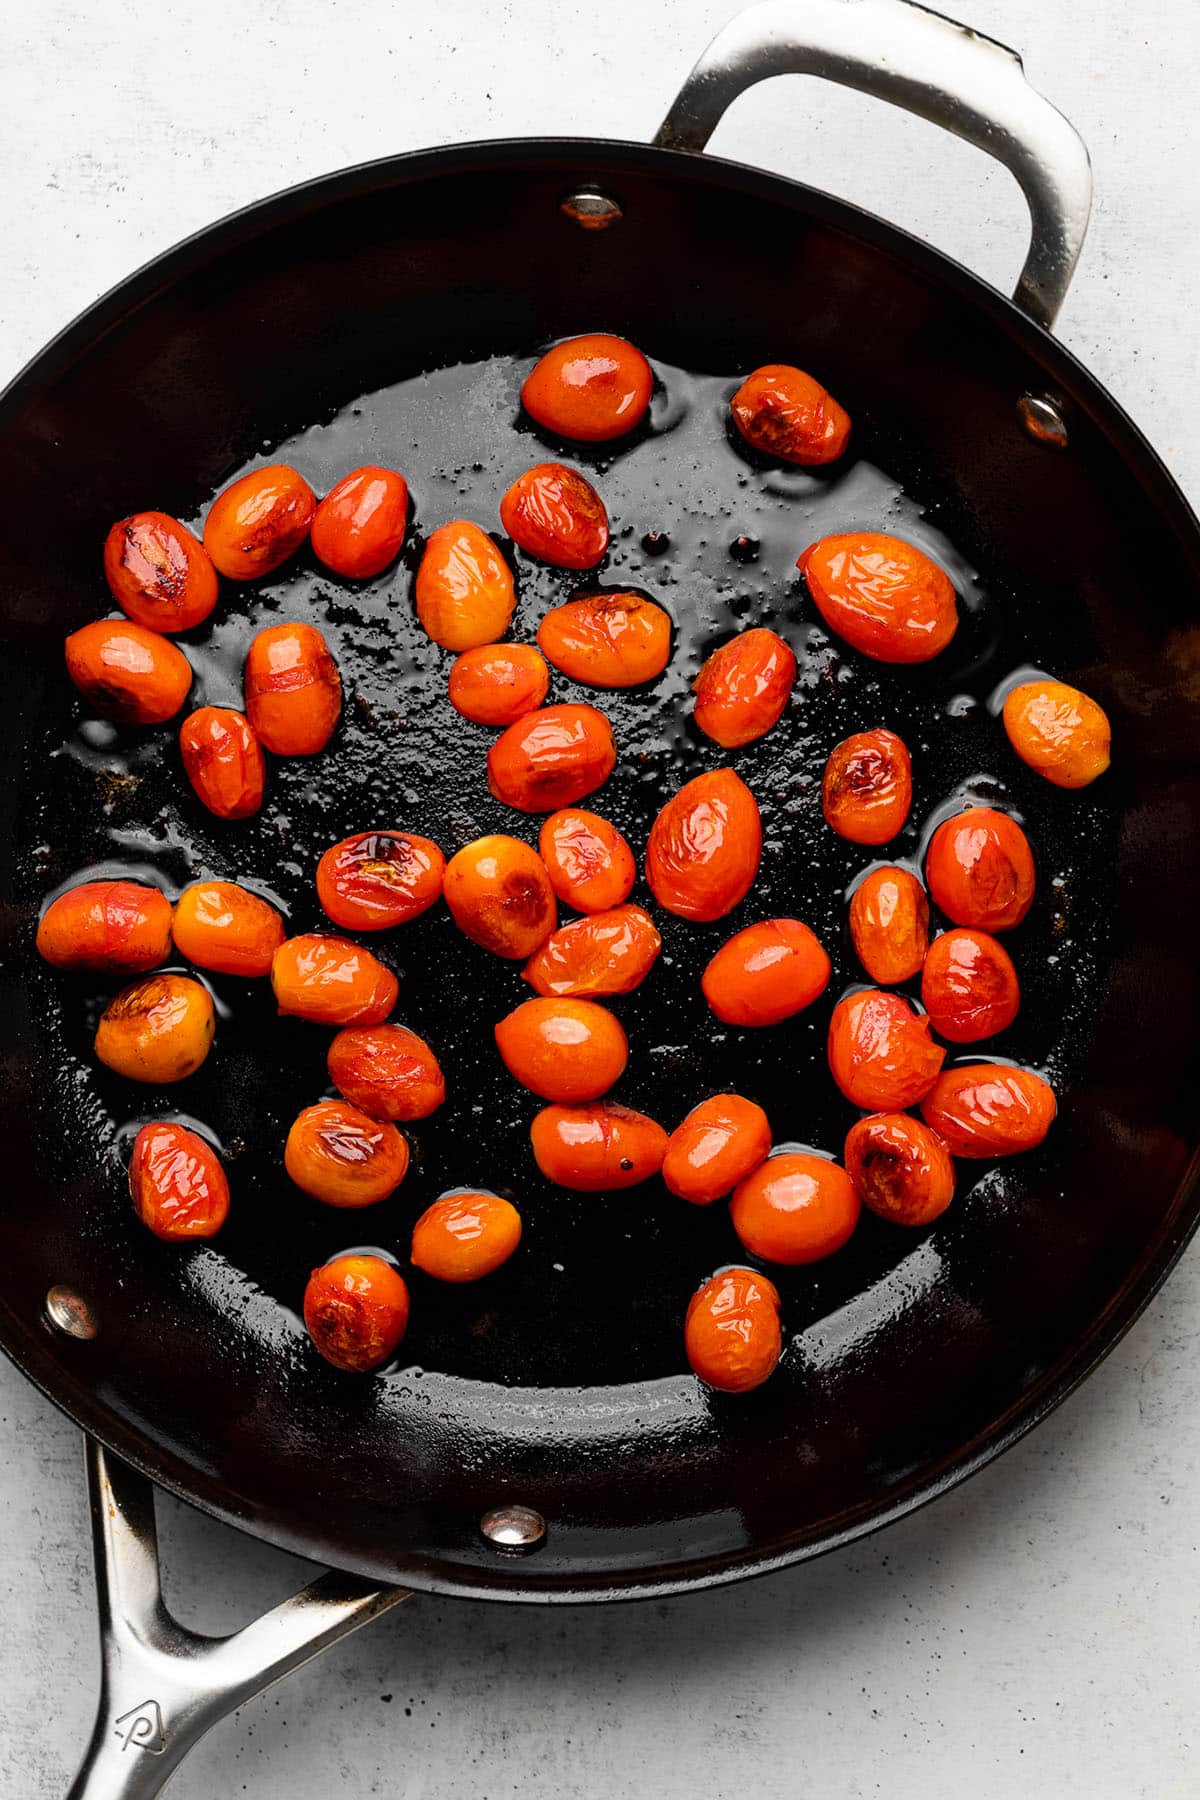 Cooking cherry tomatoes in a cast iron skillet until they begin to burst.